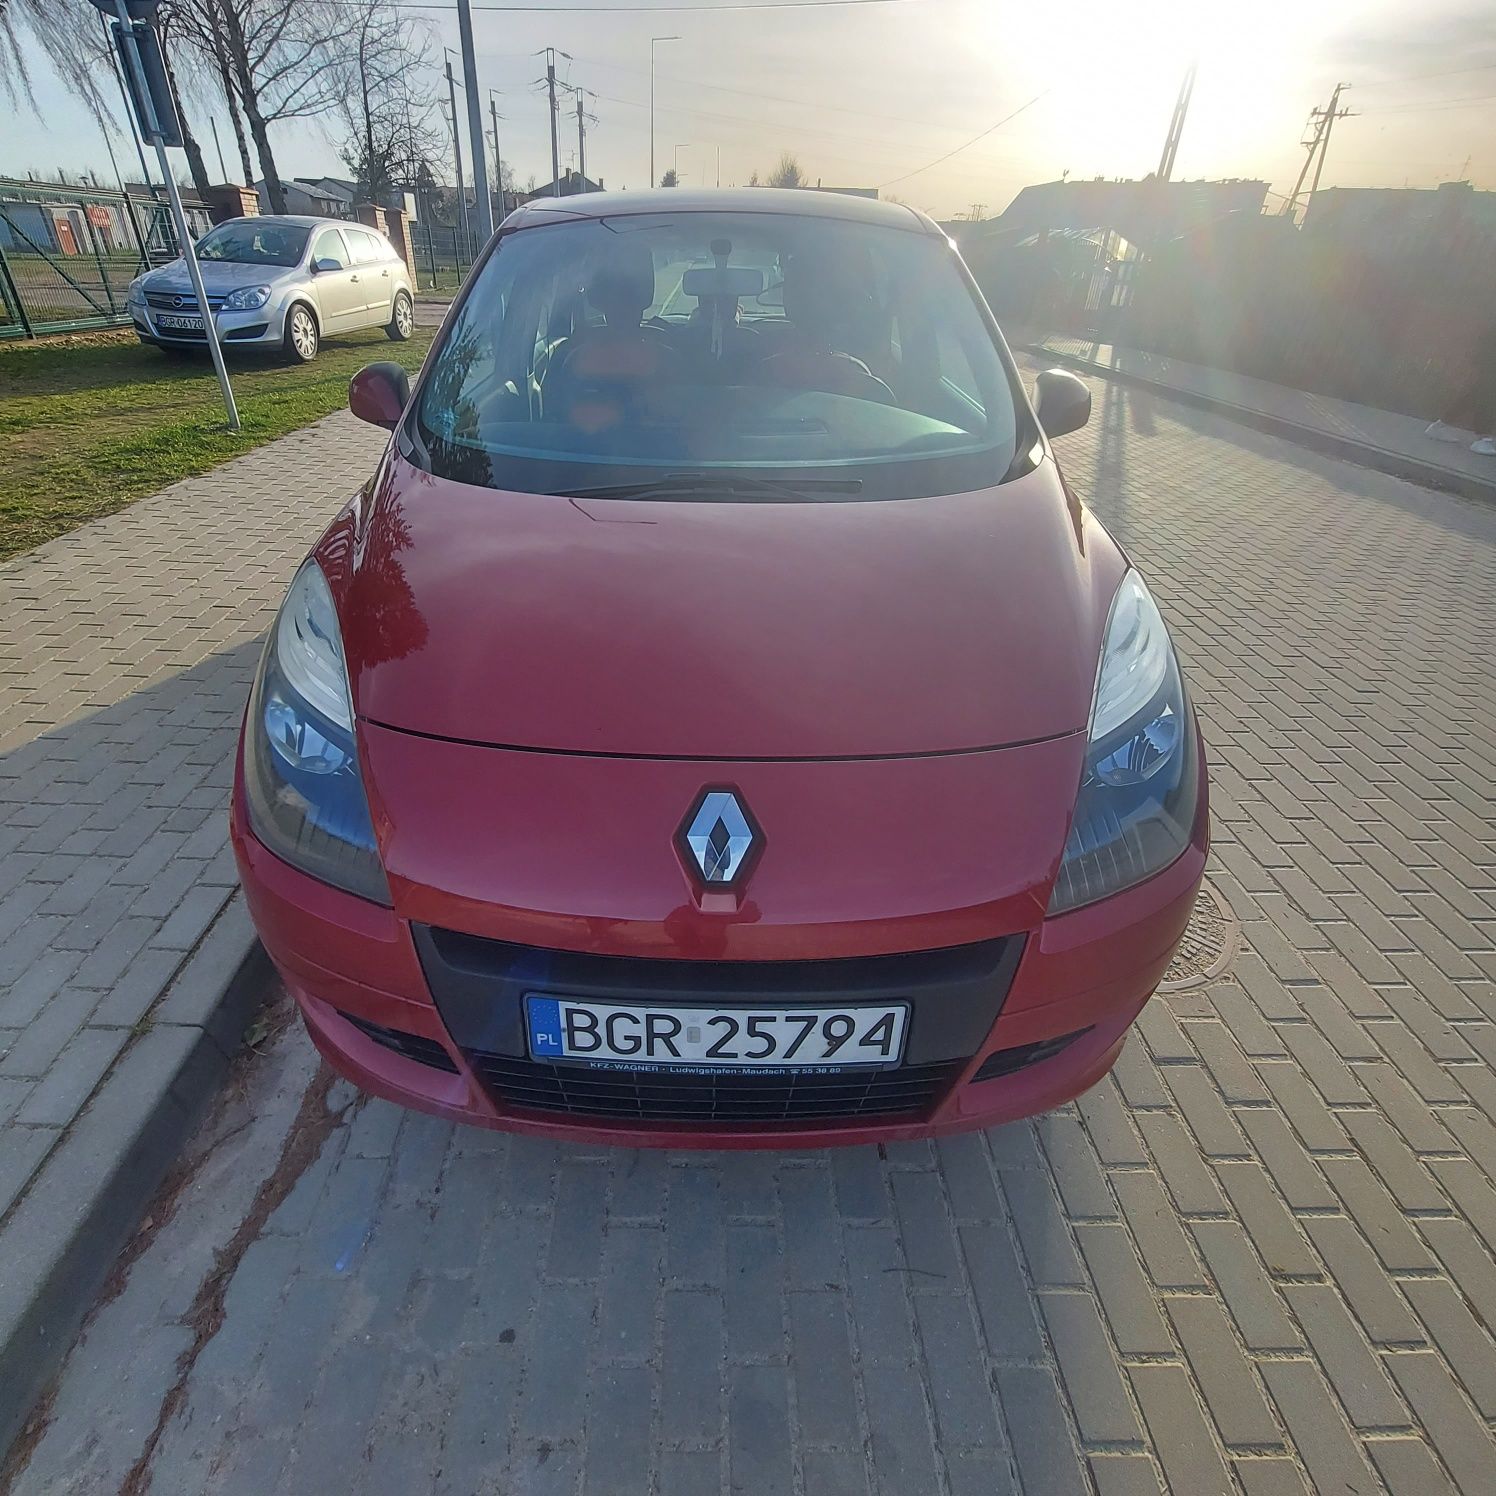 Renault Megane Scenic 1.6 benzyna 2011r.